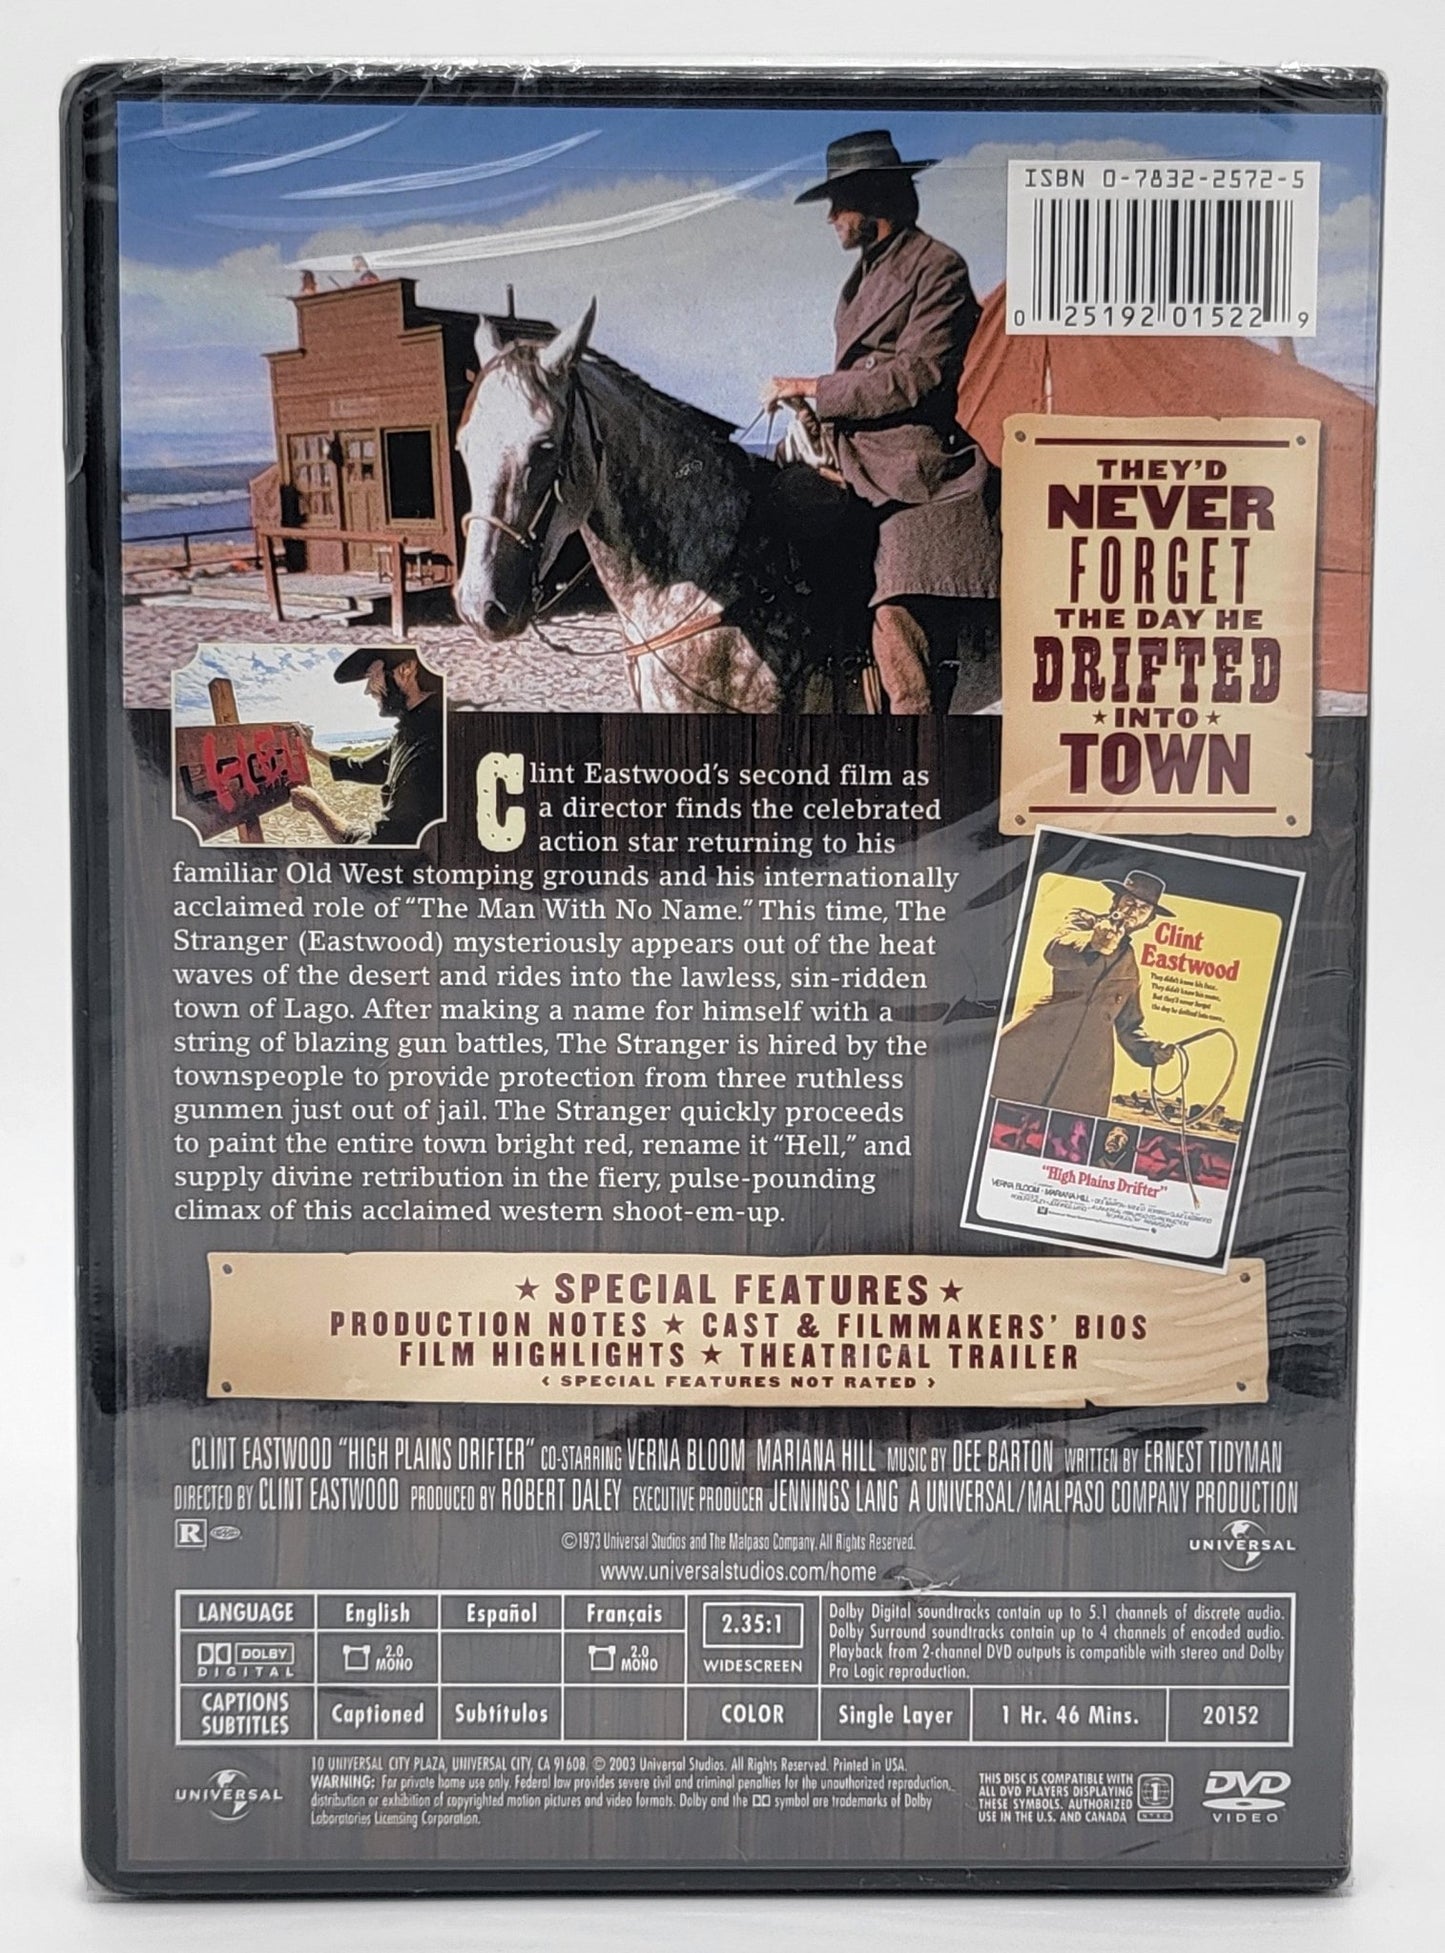 ‎ Universal Pictures Home Entertainment - Clint Eastwood - High Plains Drifter | DVD | Universal Western Collection - DVD - Steady Bunny Shop